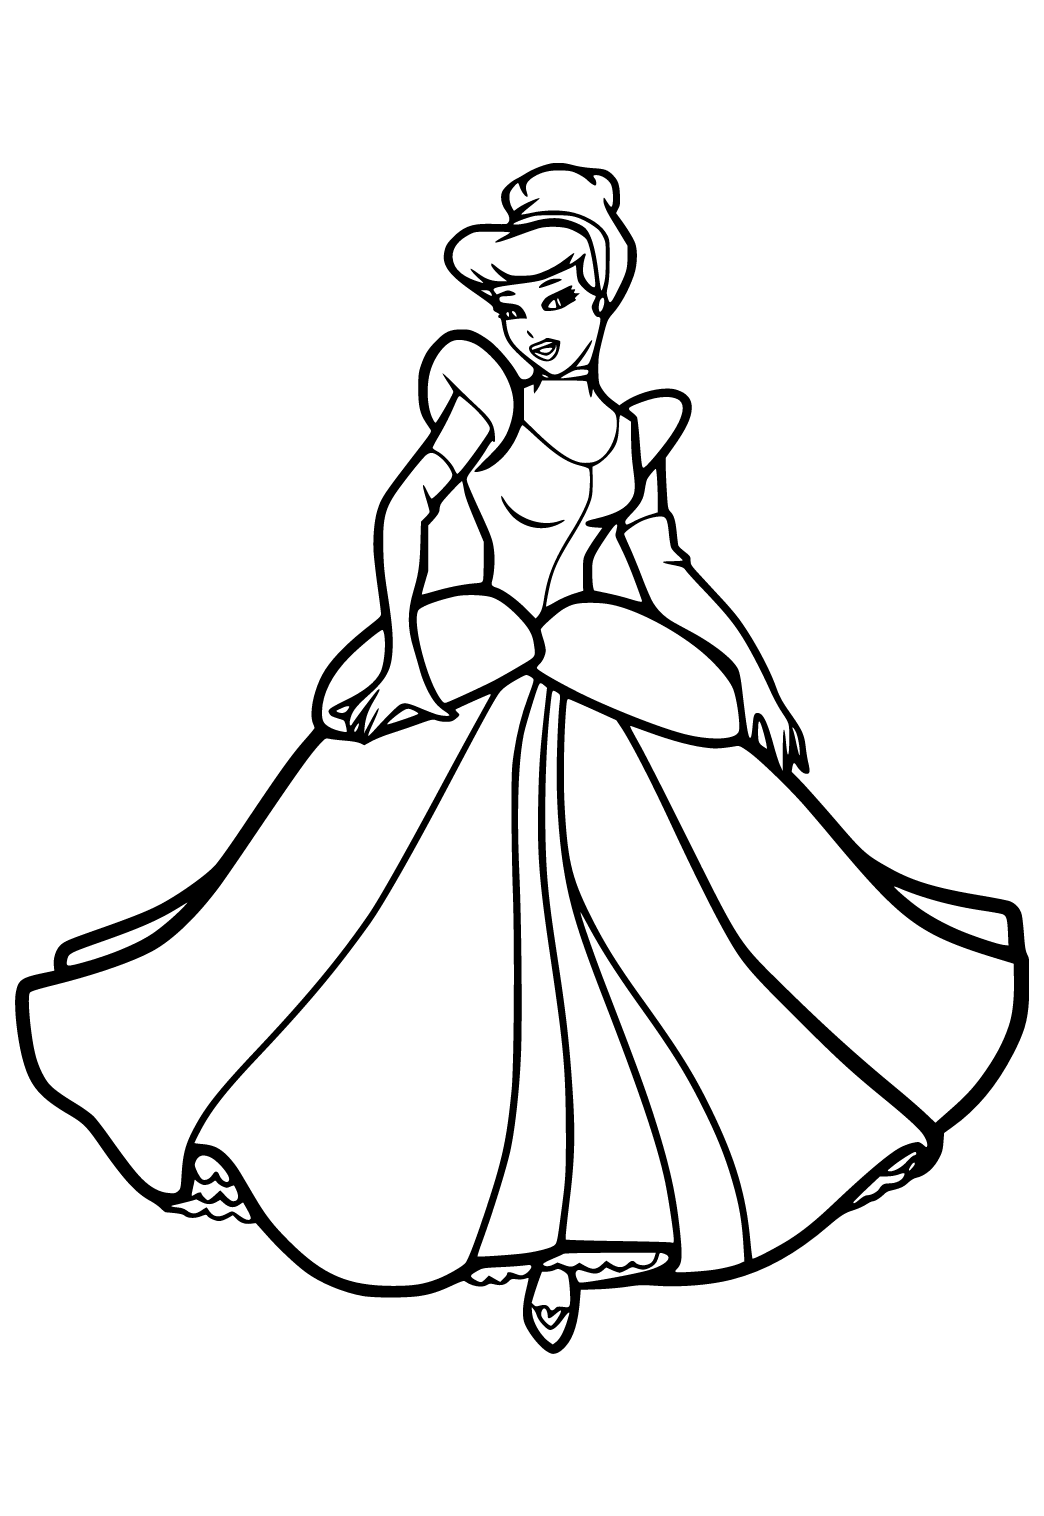 Free printable cinderella princess coloring page sheet and picture for adults and kids girls and boys